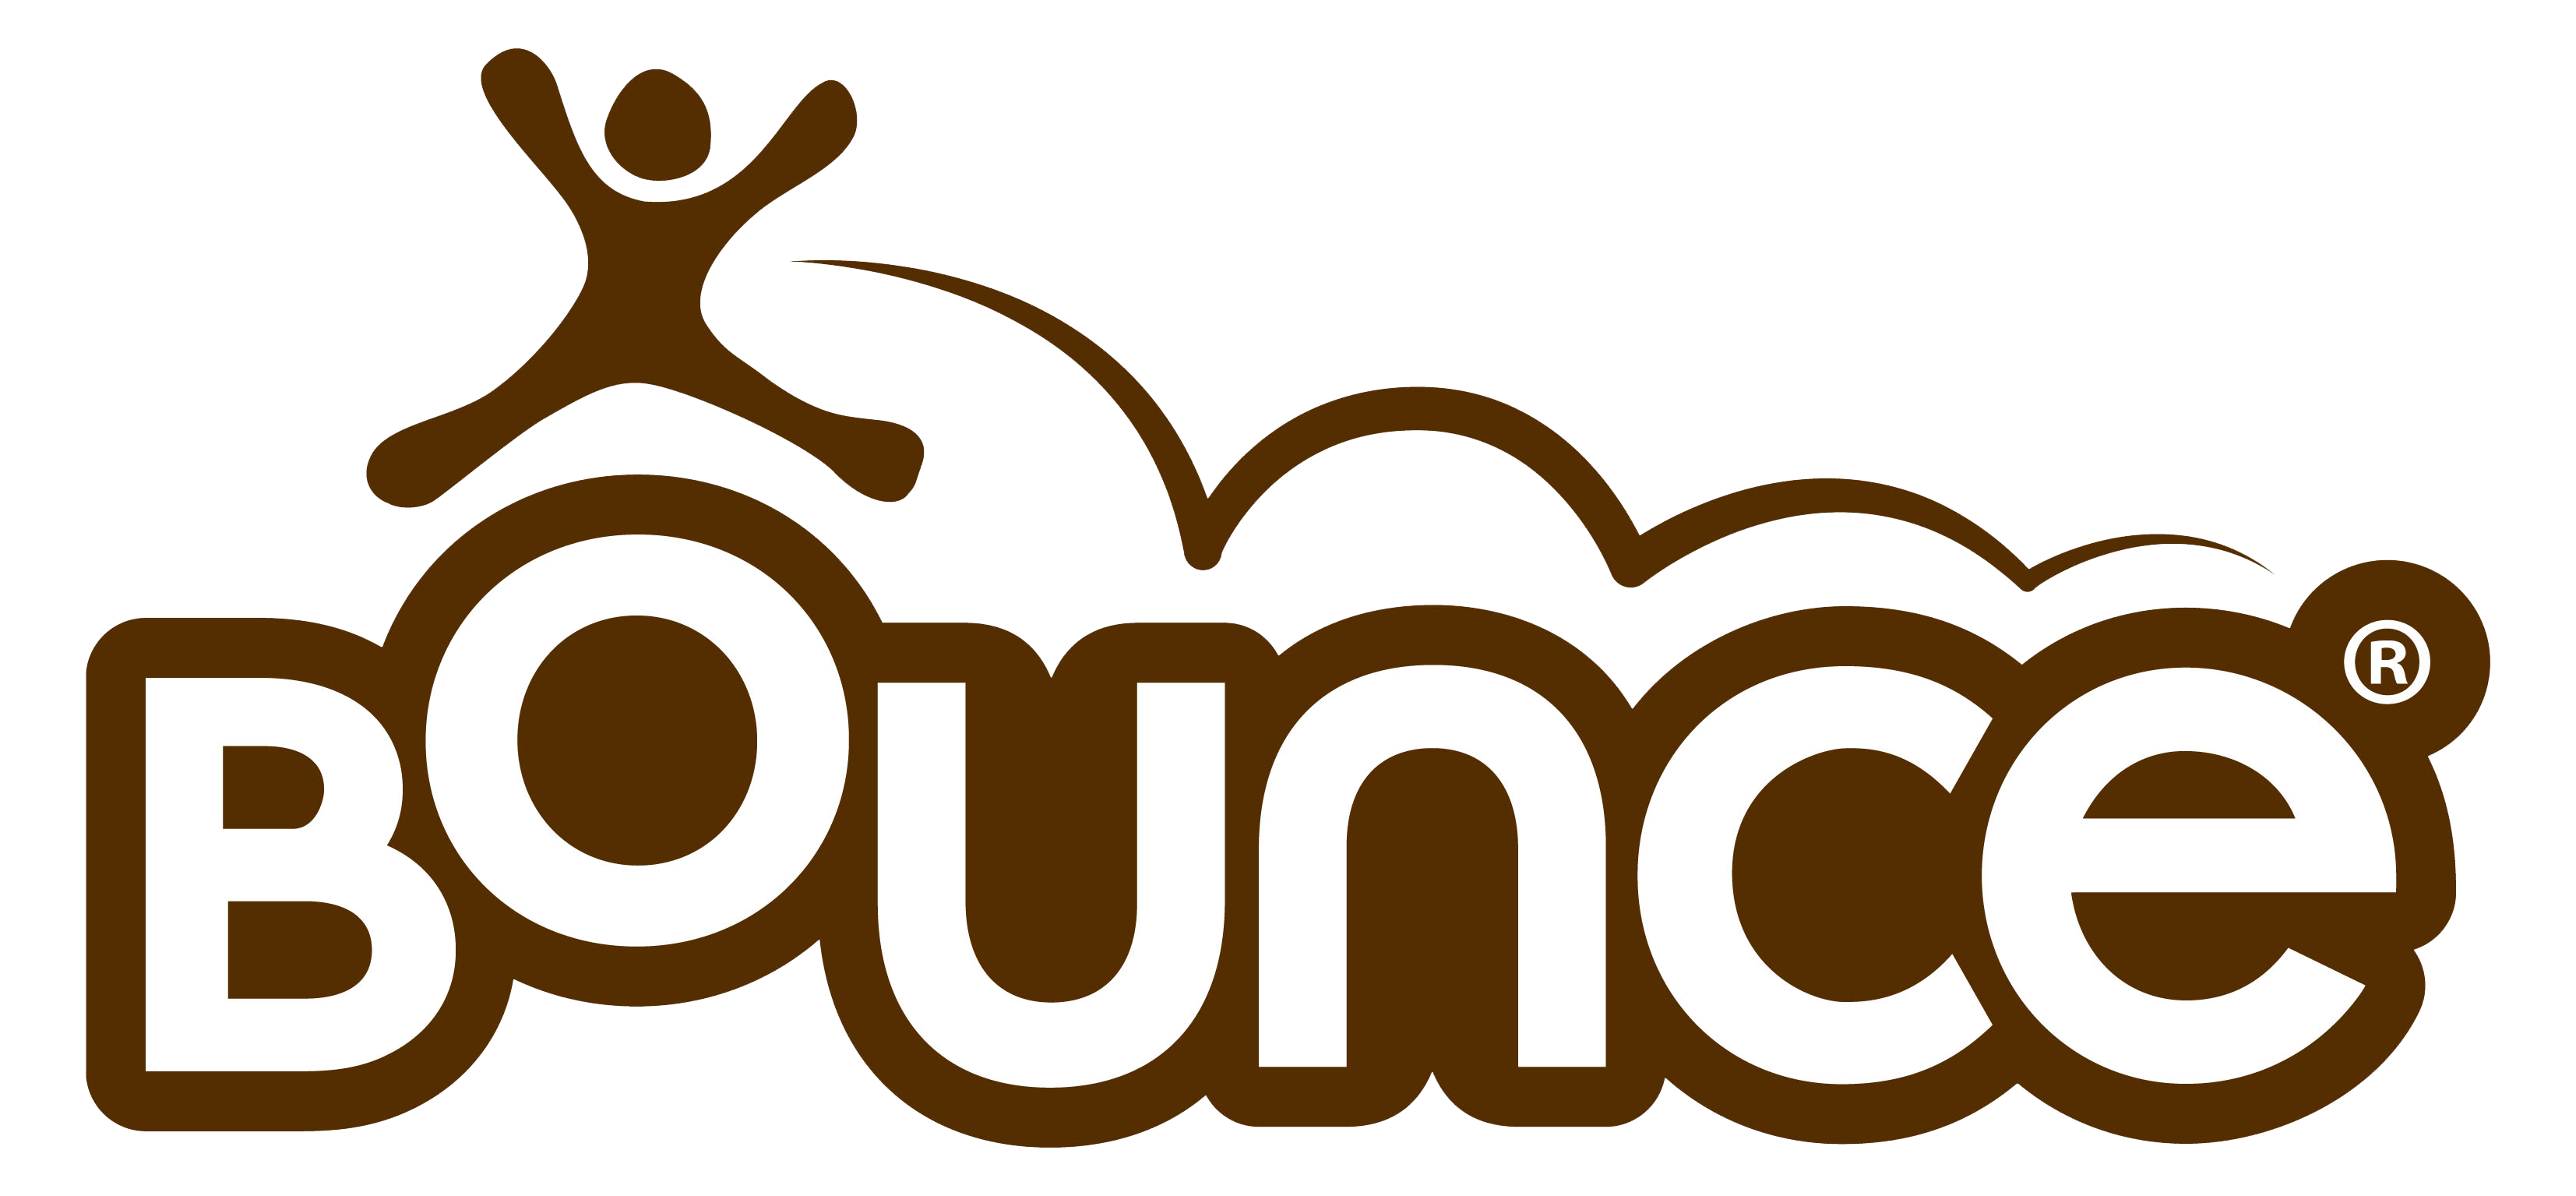 Bounce Logo An Animated Z Bouncing Around On One Of His Shoes Backgrounds |  JPG Free Download - Pikbest